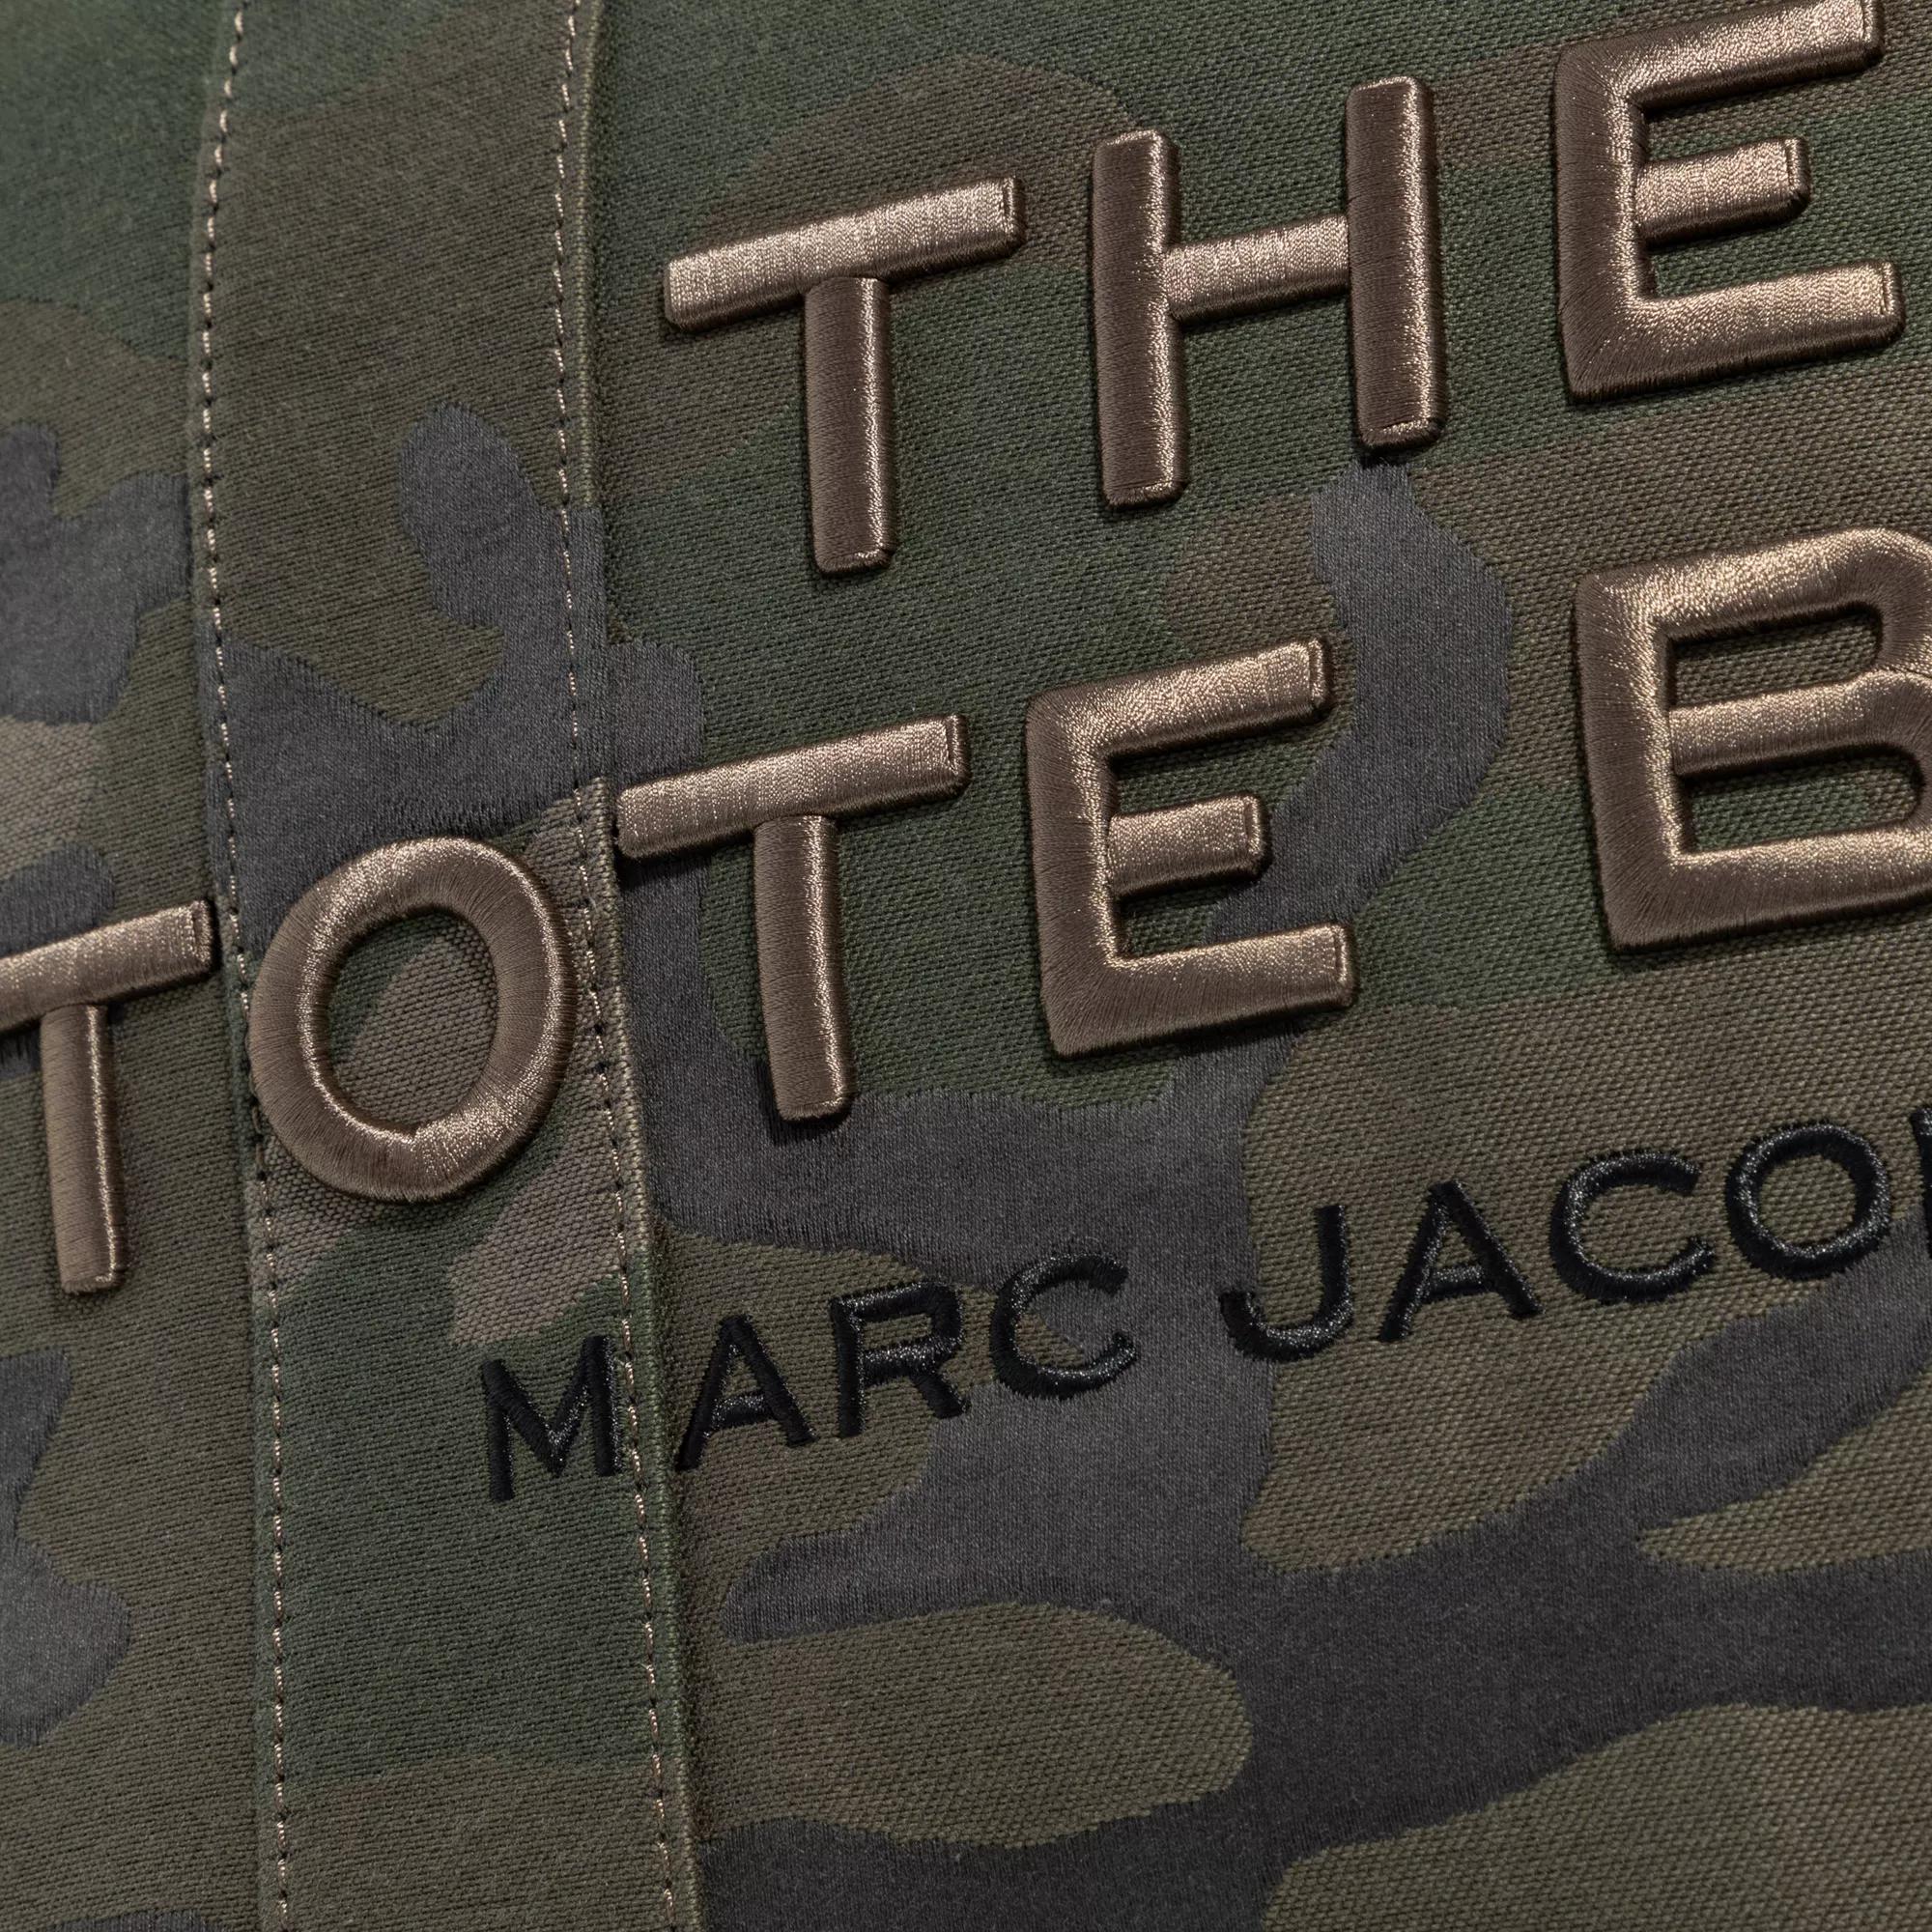 Marc Jacobs Totes The Large Como Jacquard Tote Bag in groen